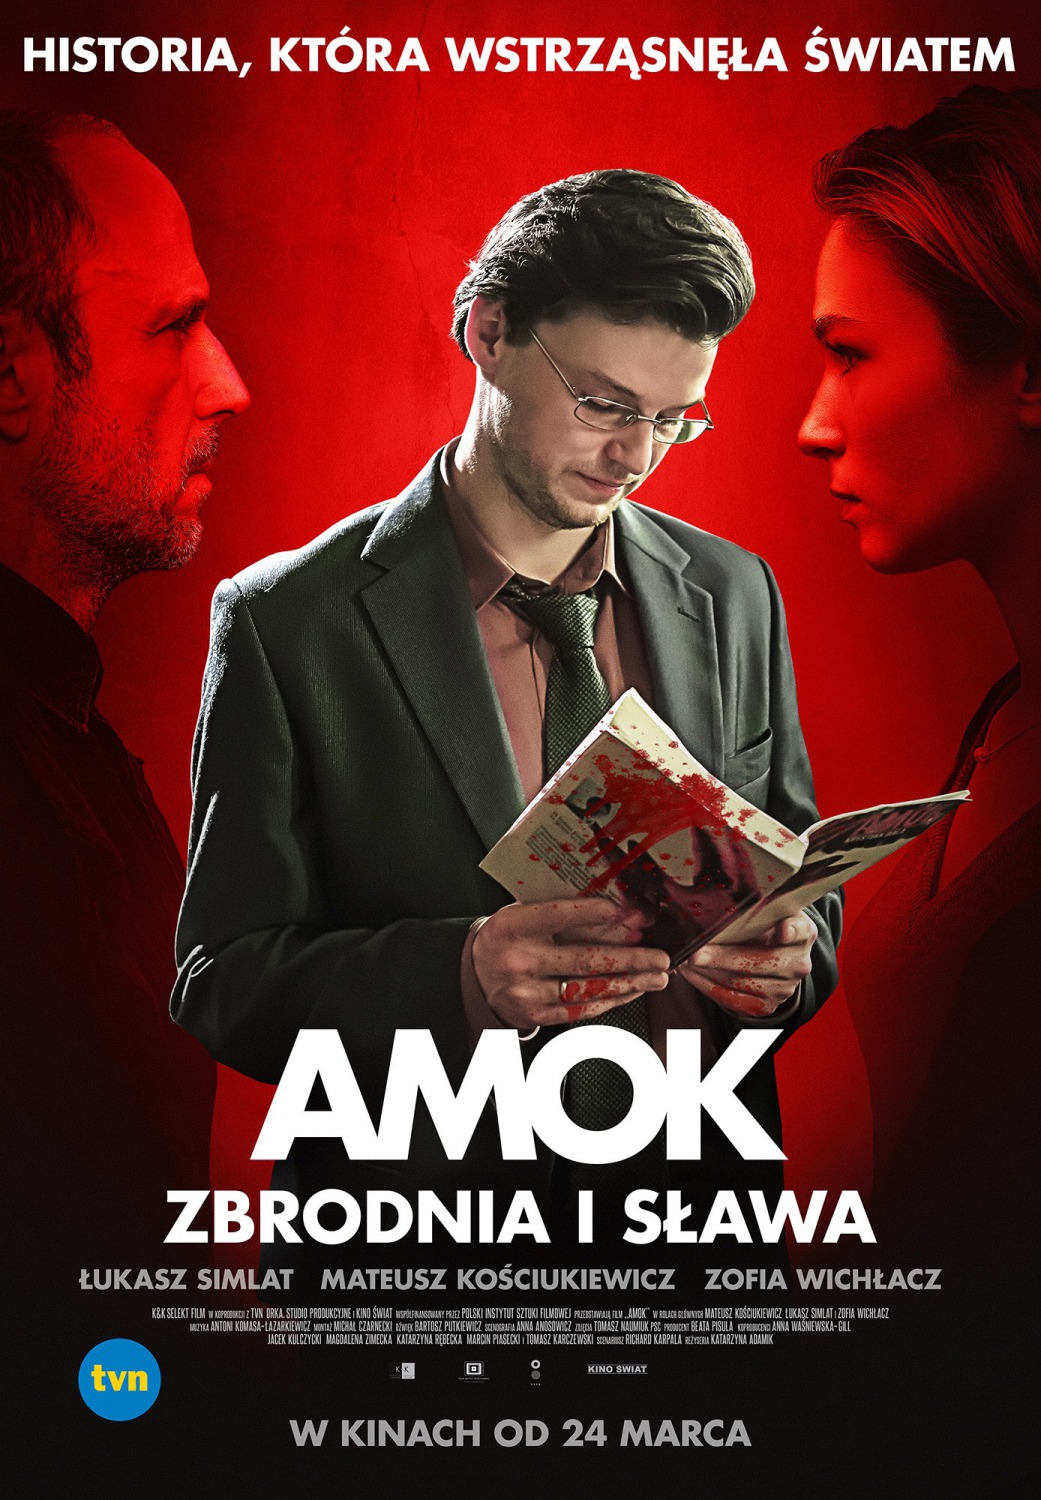 Extra Large TV Poster Image for Amok 